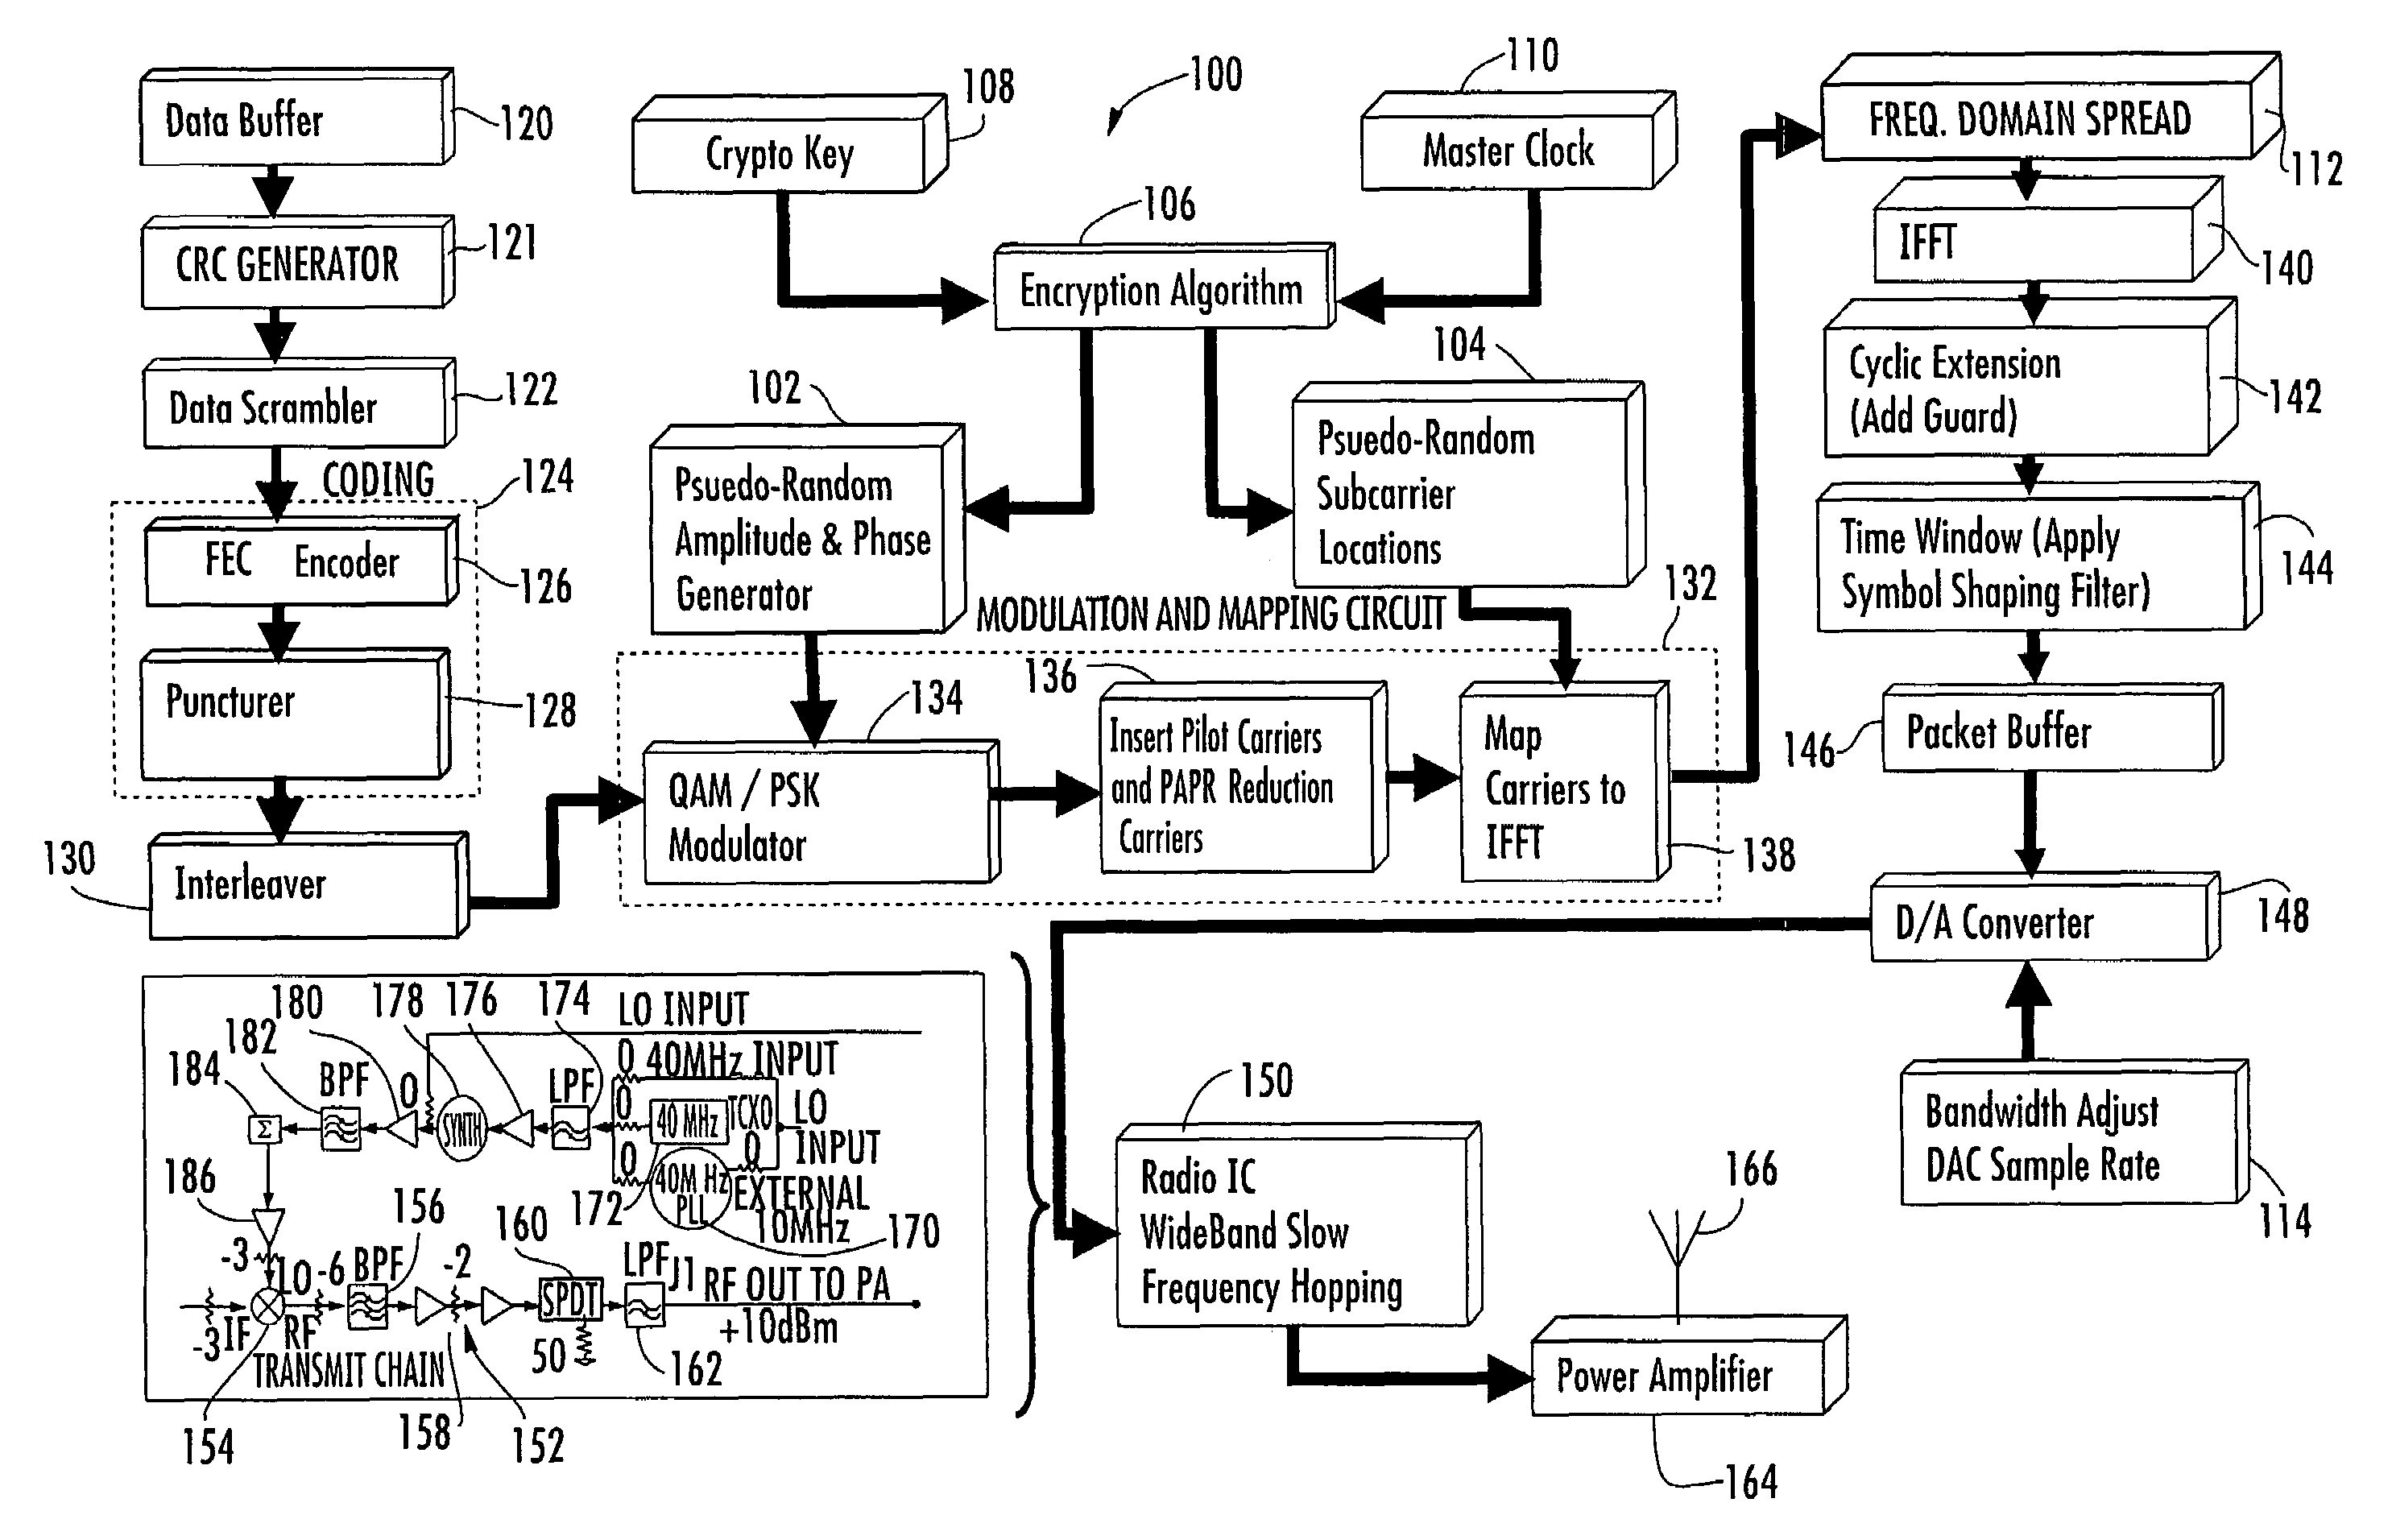 System and method for communicating data using symbol-based randomized orthogonal frequency division multiplexing (OFDM) with applied frequency domain spreading